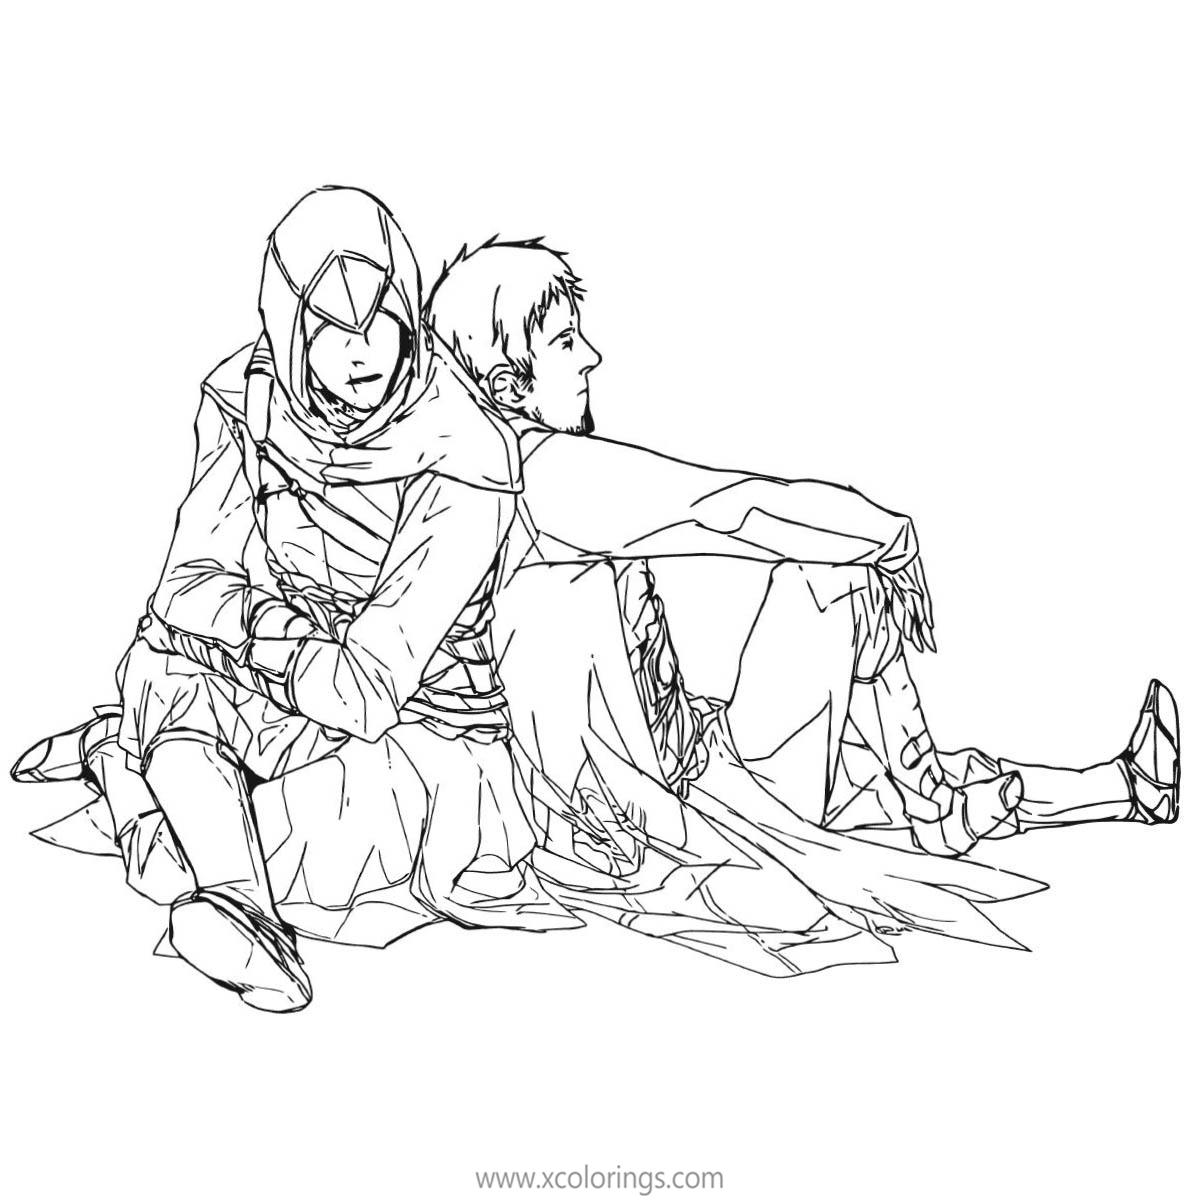 Free Assassin's Creed Coloring Pages Sketch printable